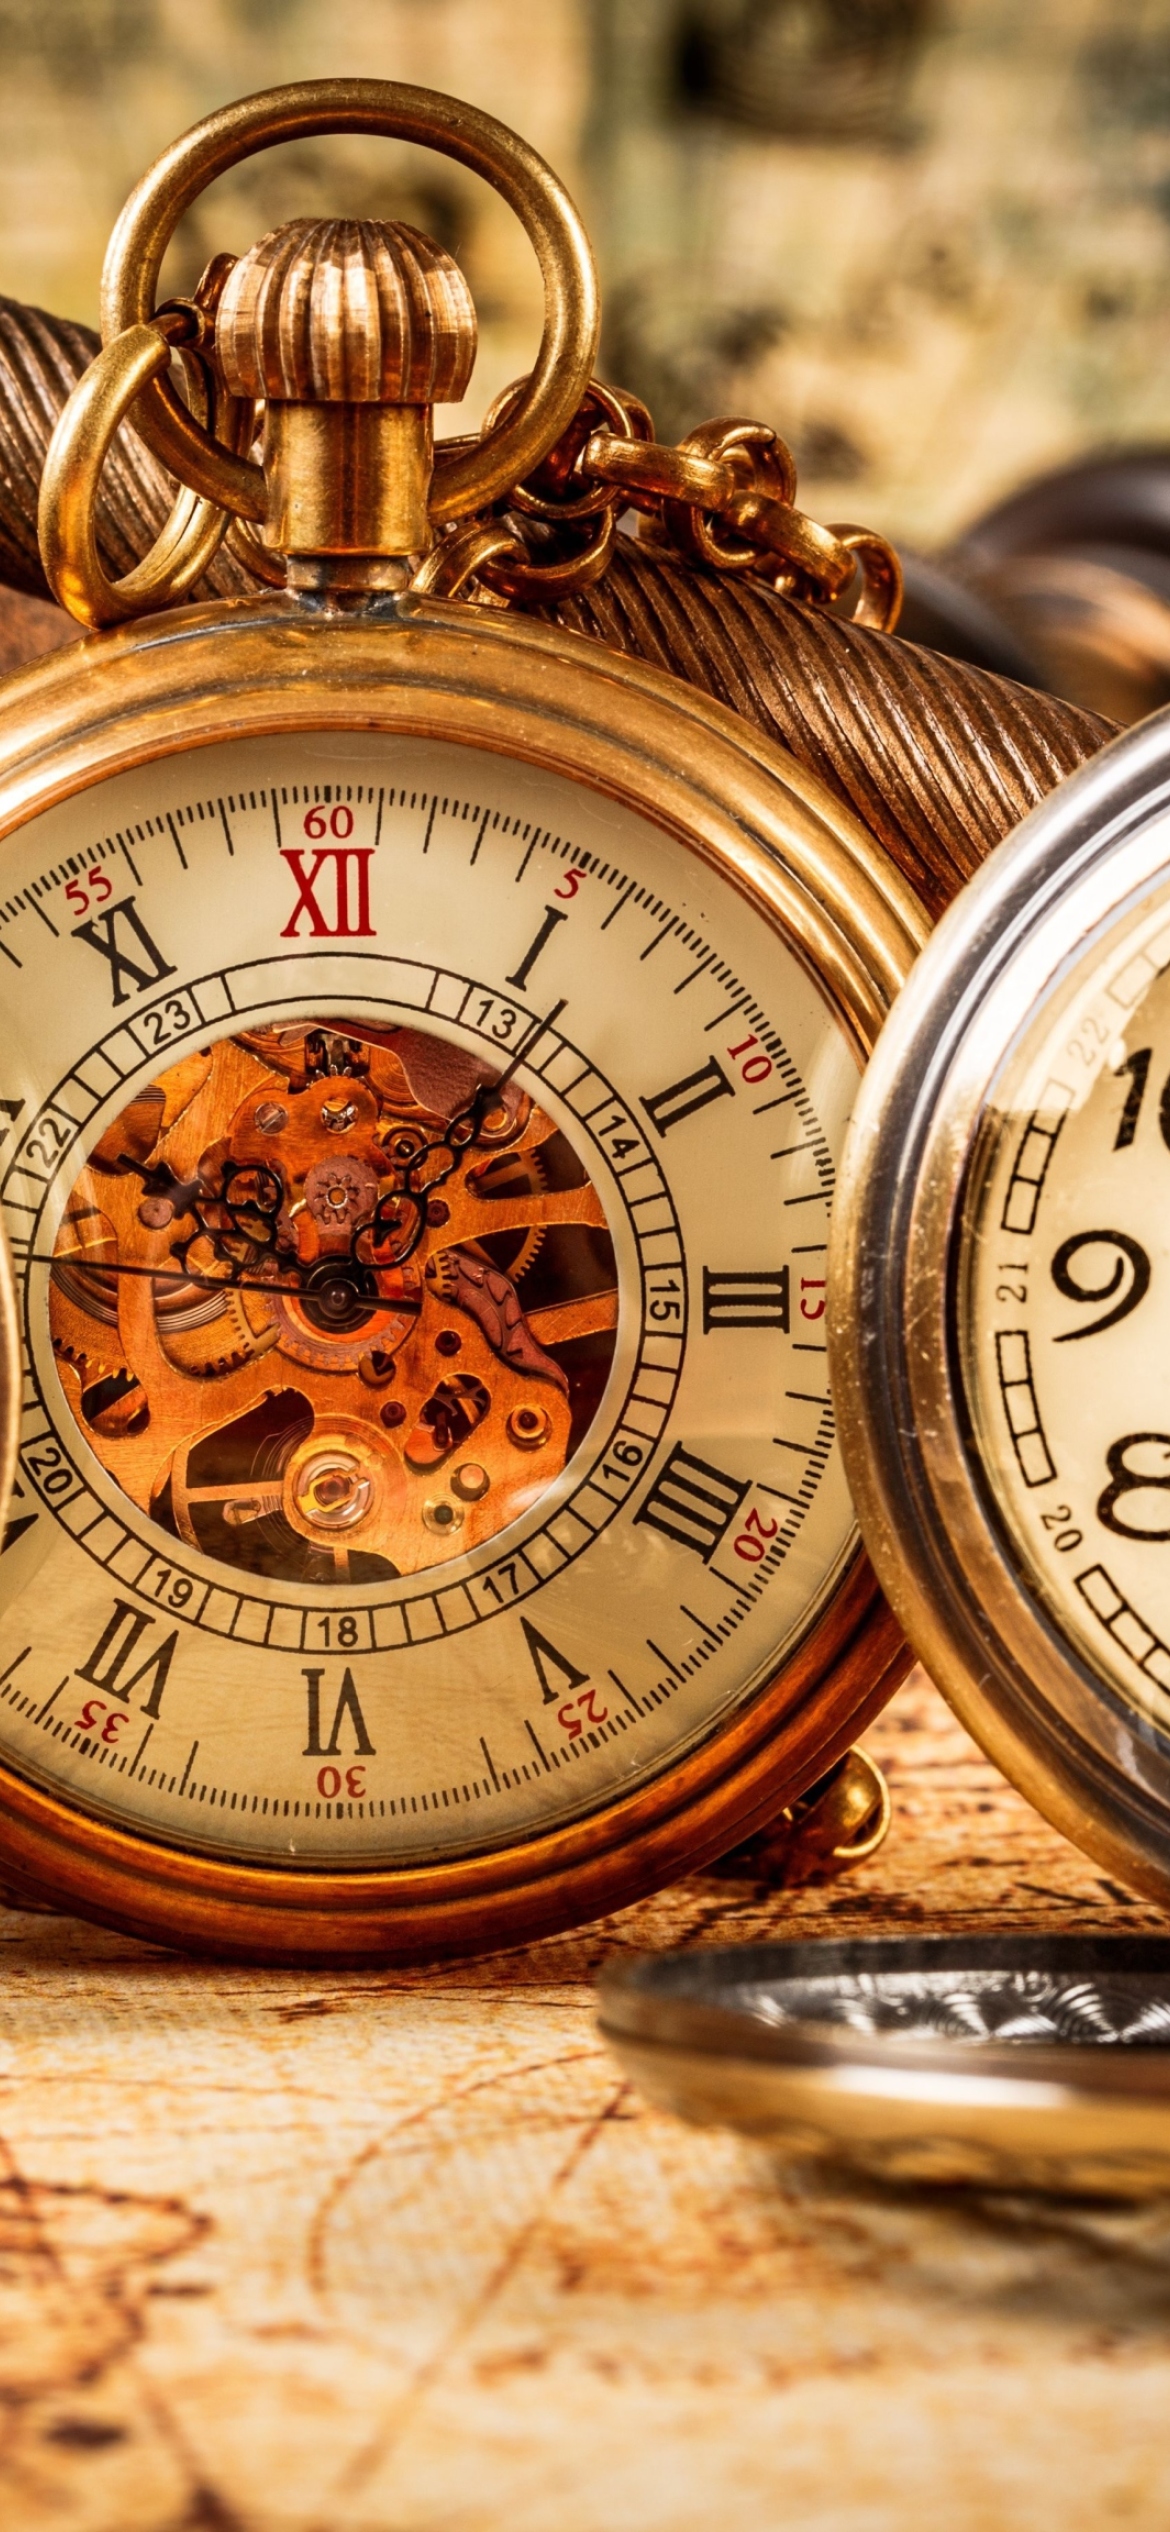 Time And Clocks wallpaper 1170x2532